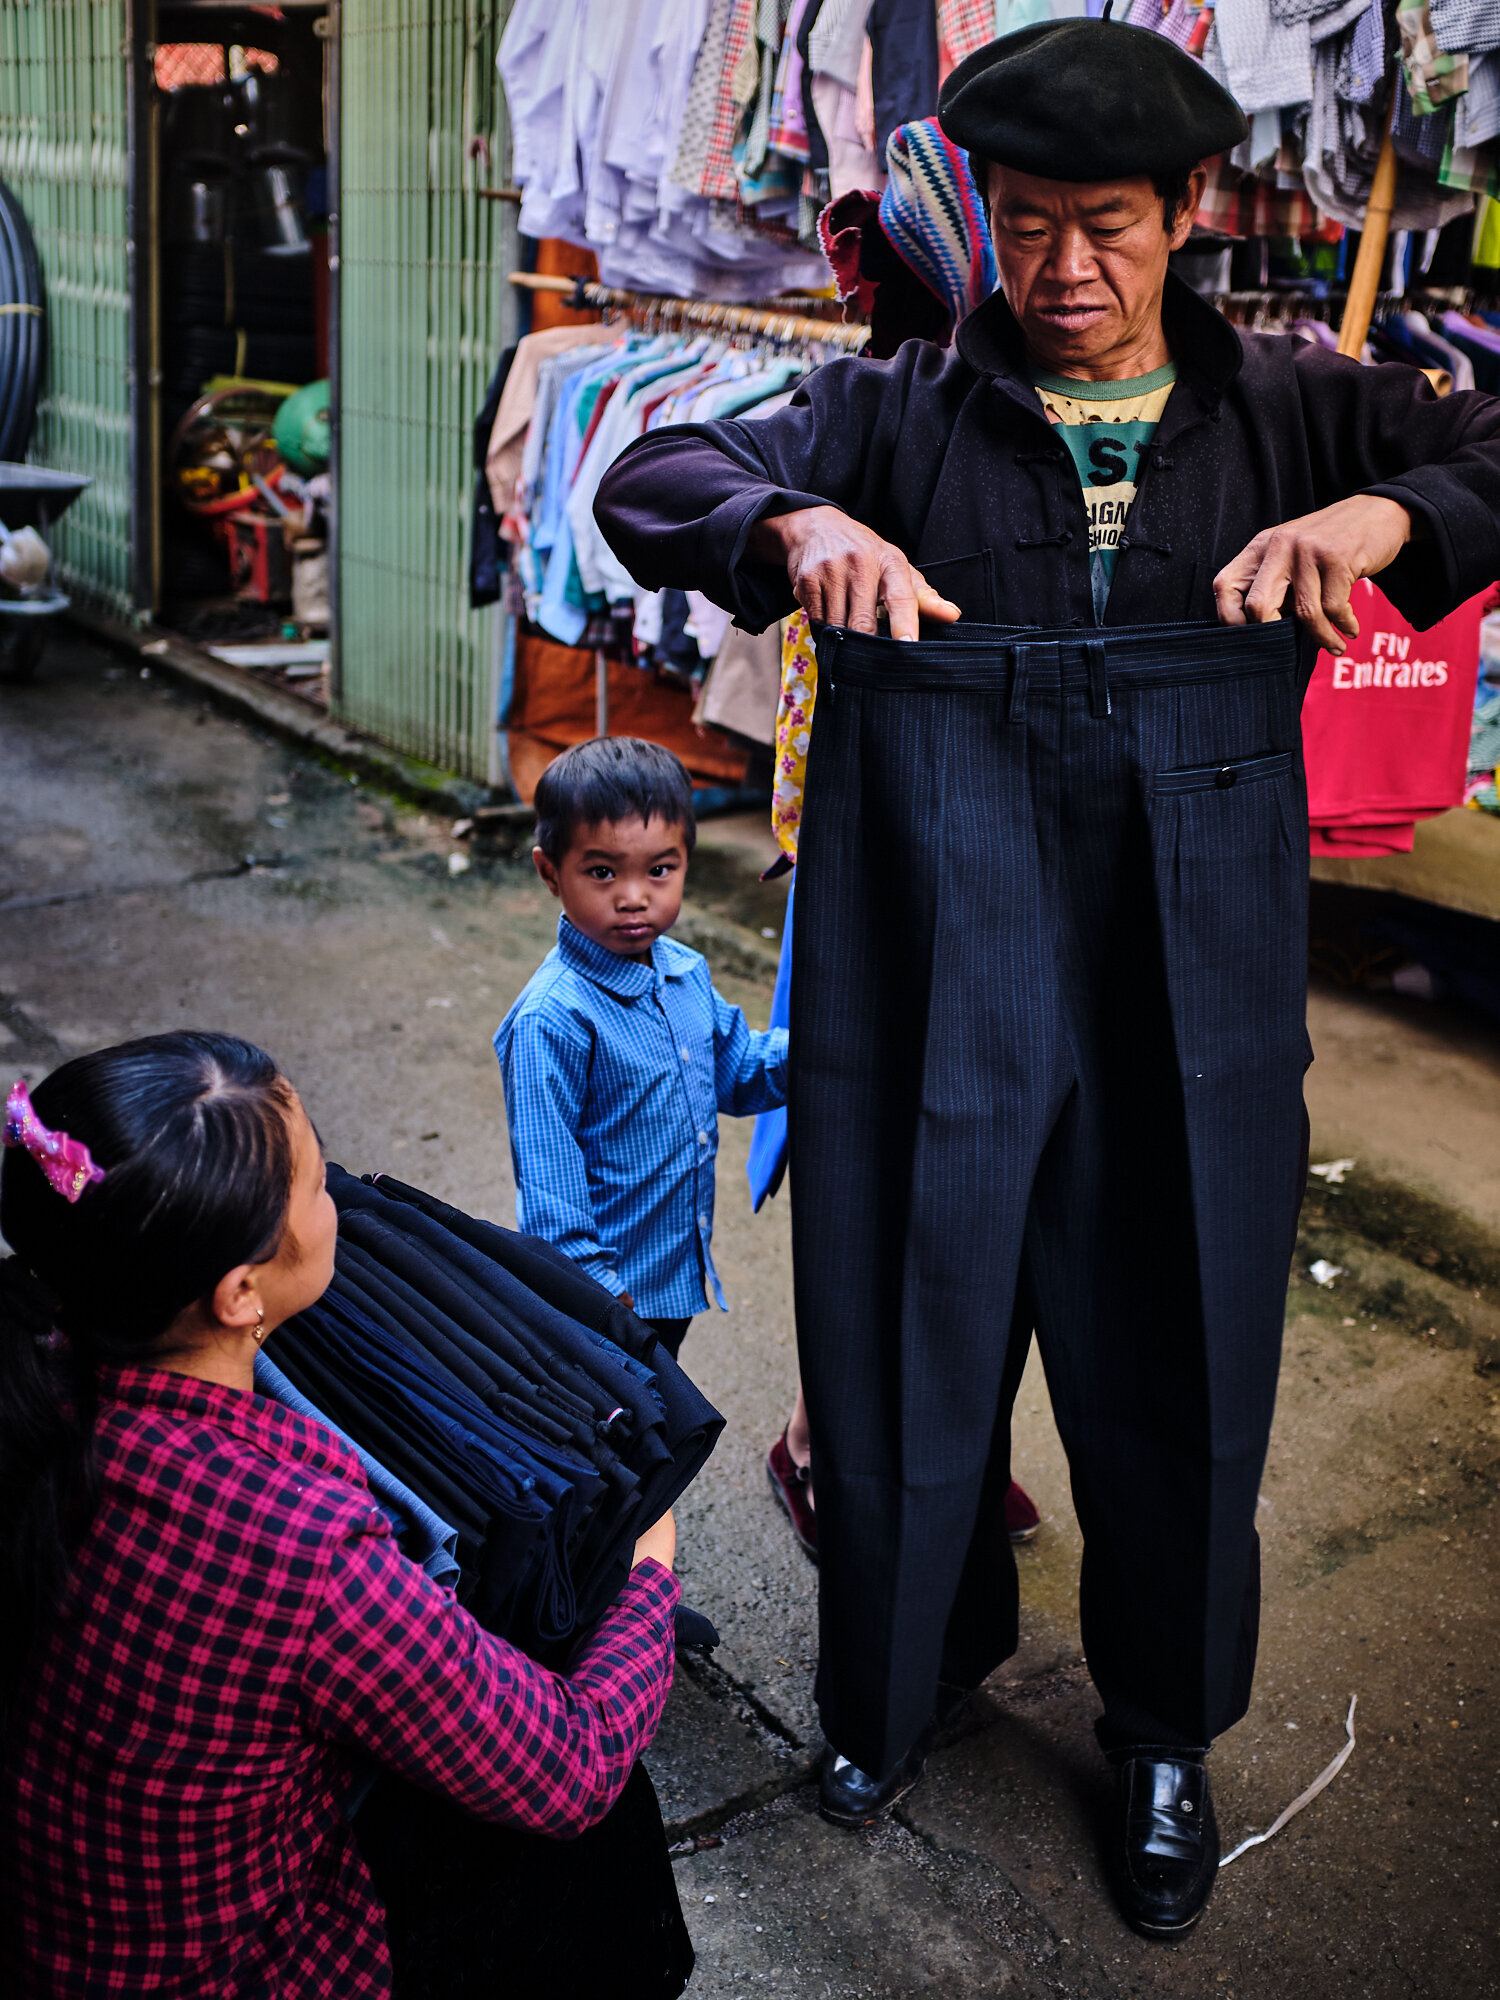  A villager sizing up a trouser 